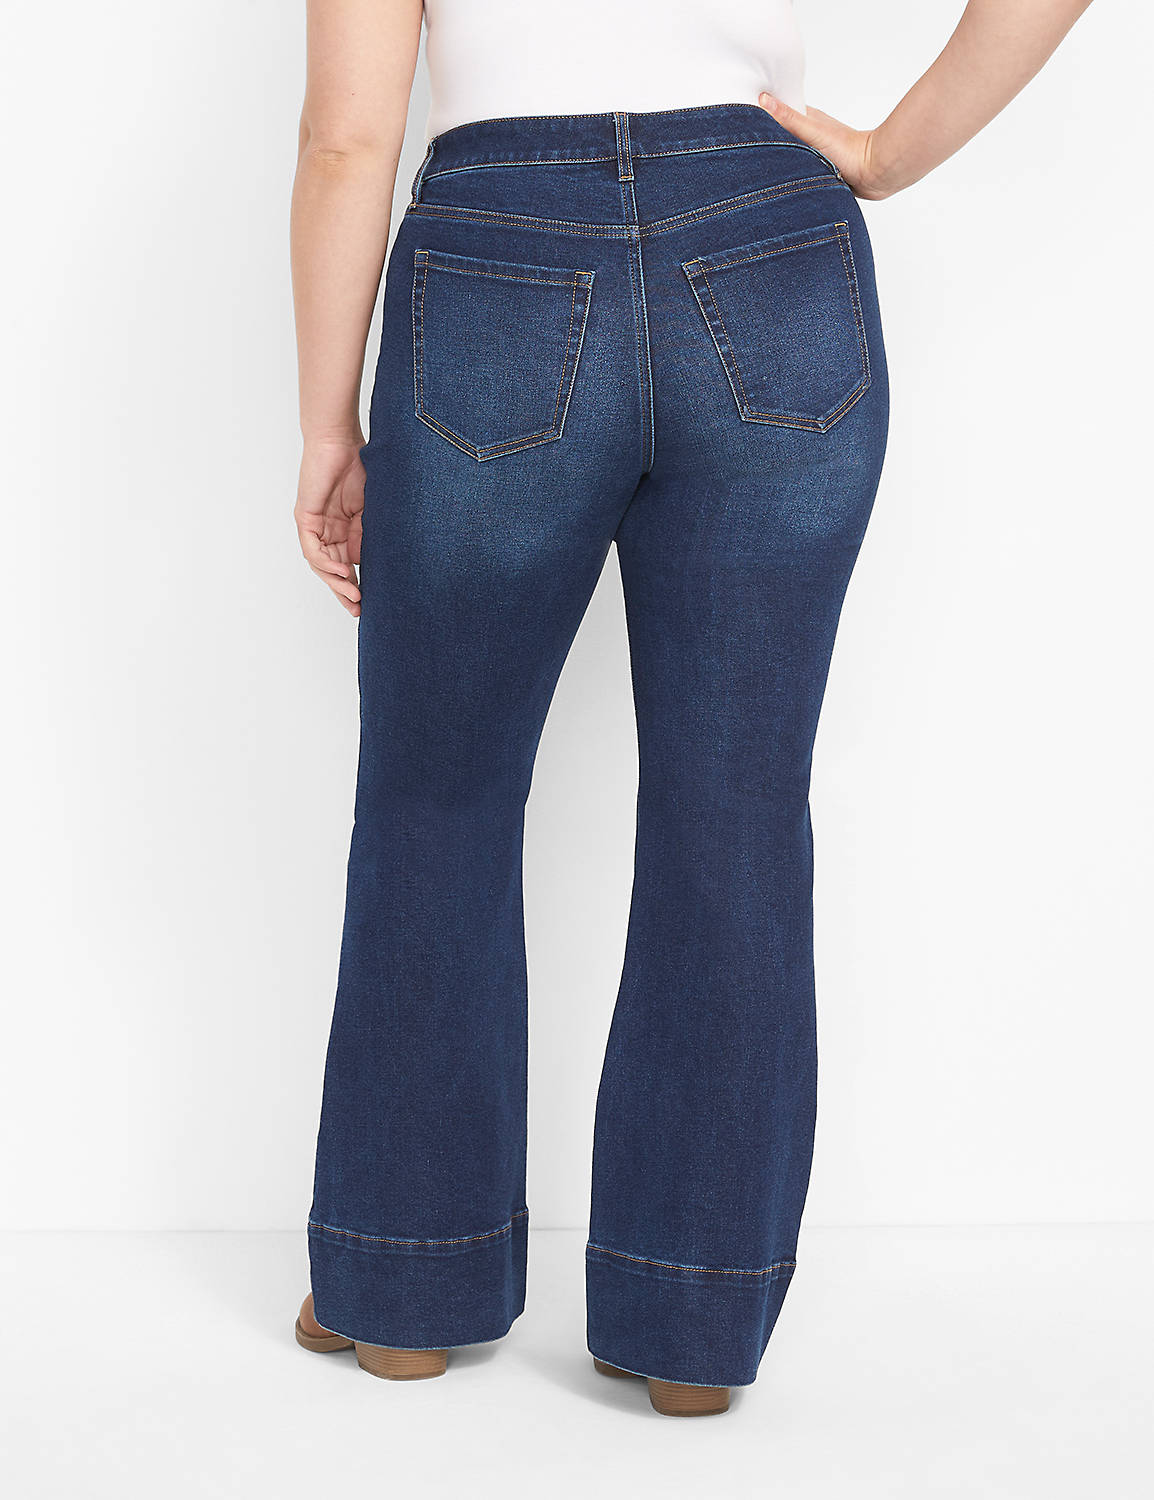 SIGNATURE FIT FLARE JEAN - DOWNTOWN Product Image 2